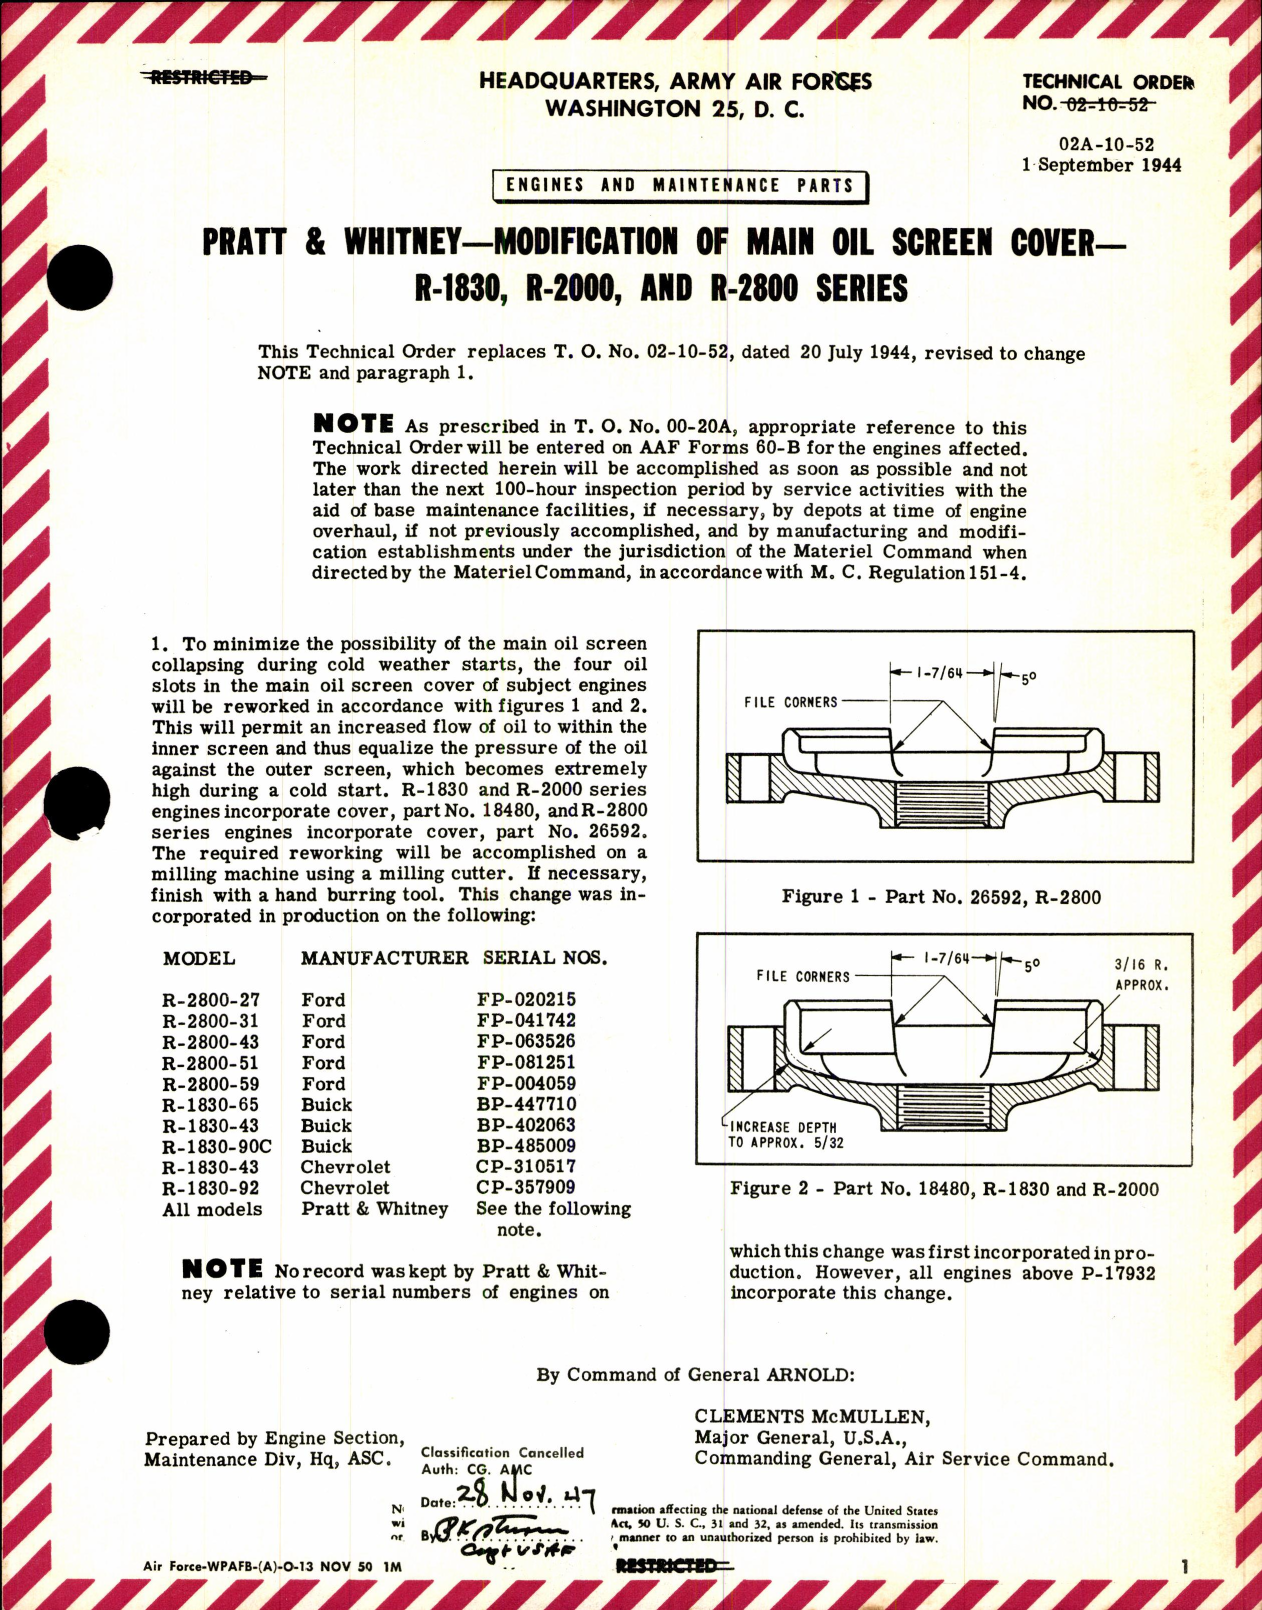 Sample page 1 from AirCorps Library document: Main Oil Screen Cover for R-1830, R-2000, & R-2800 Series